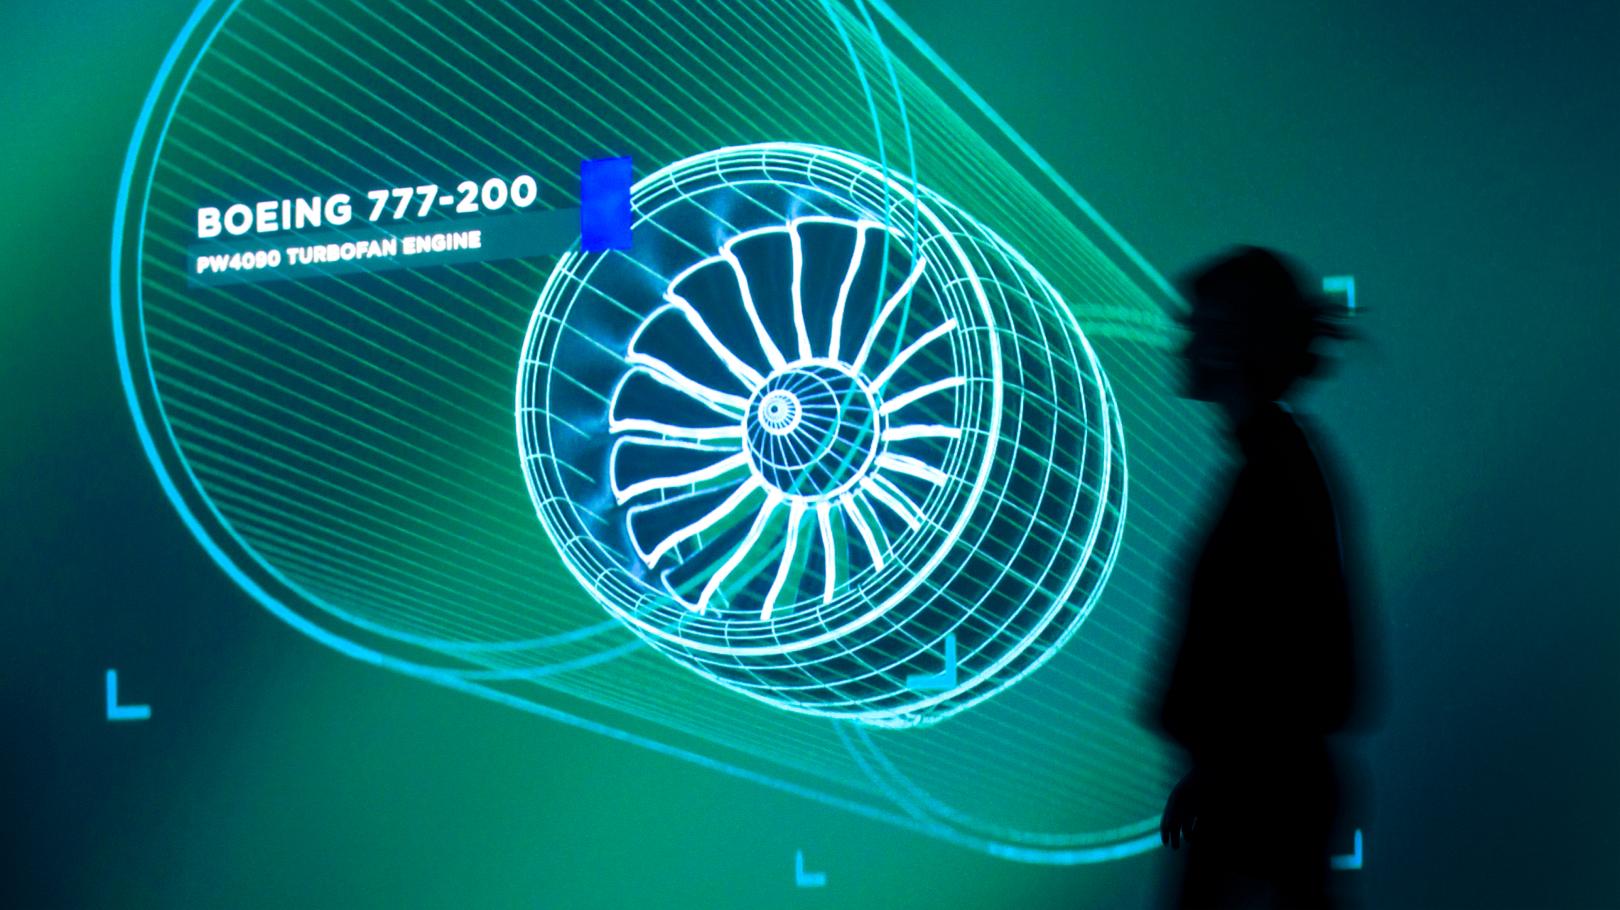 Woman in silohuette in front of a large green glowing image of an airplane engine CAD drawing